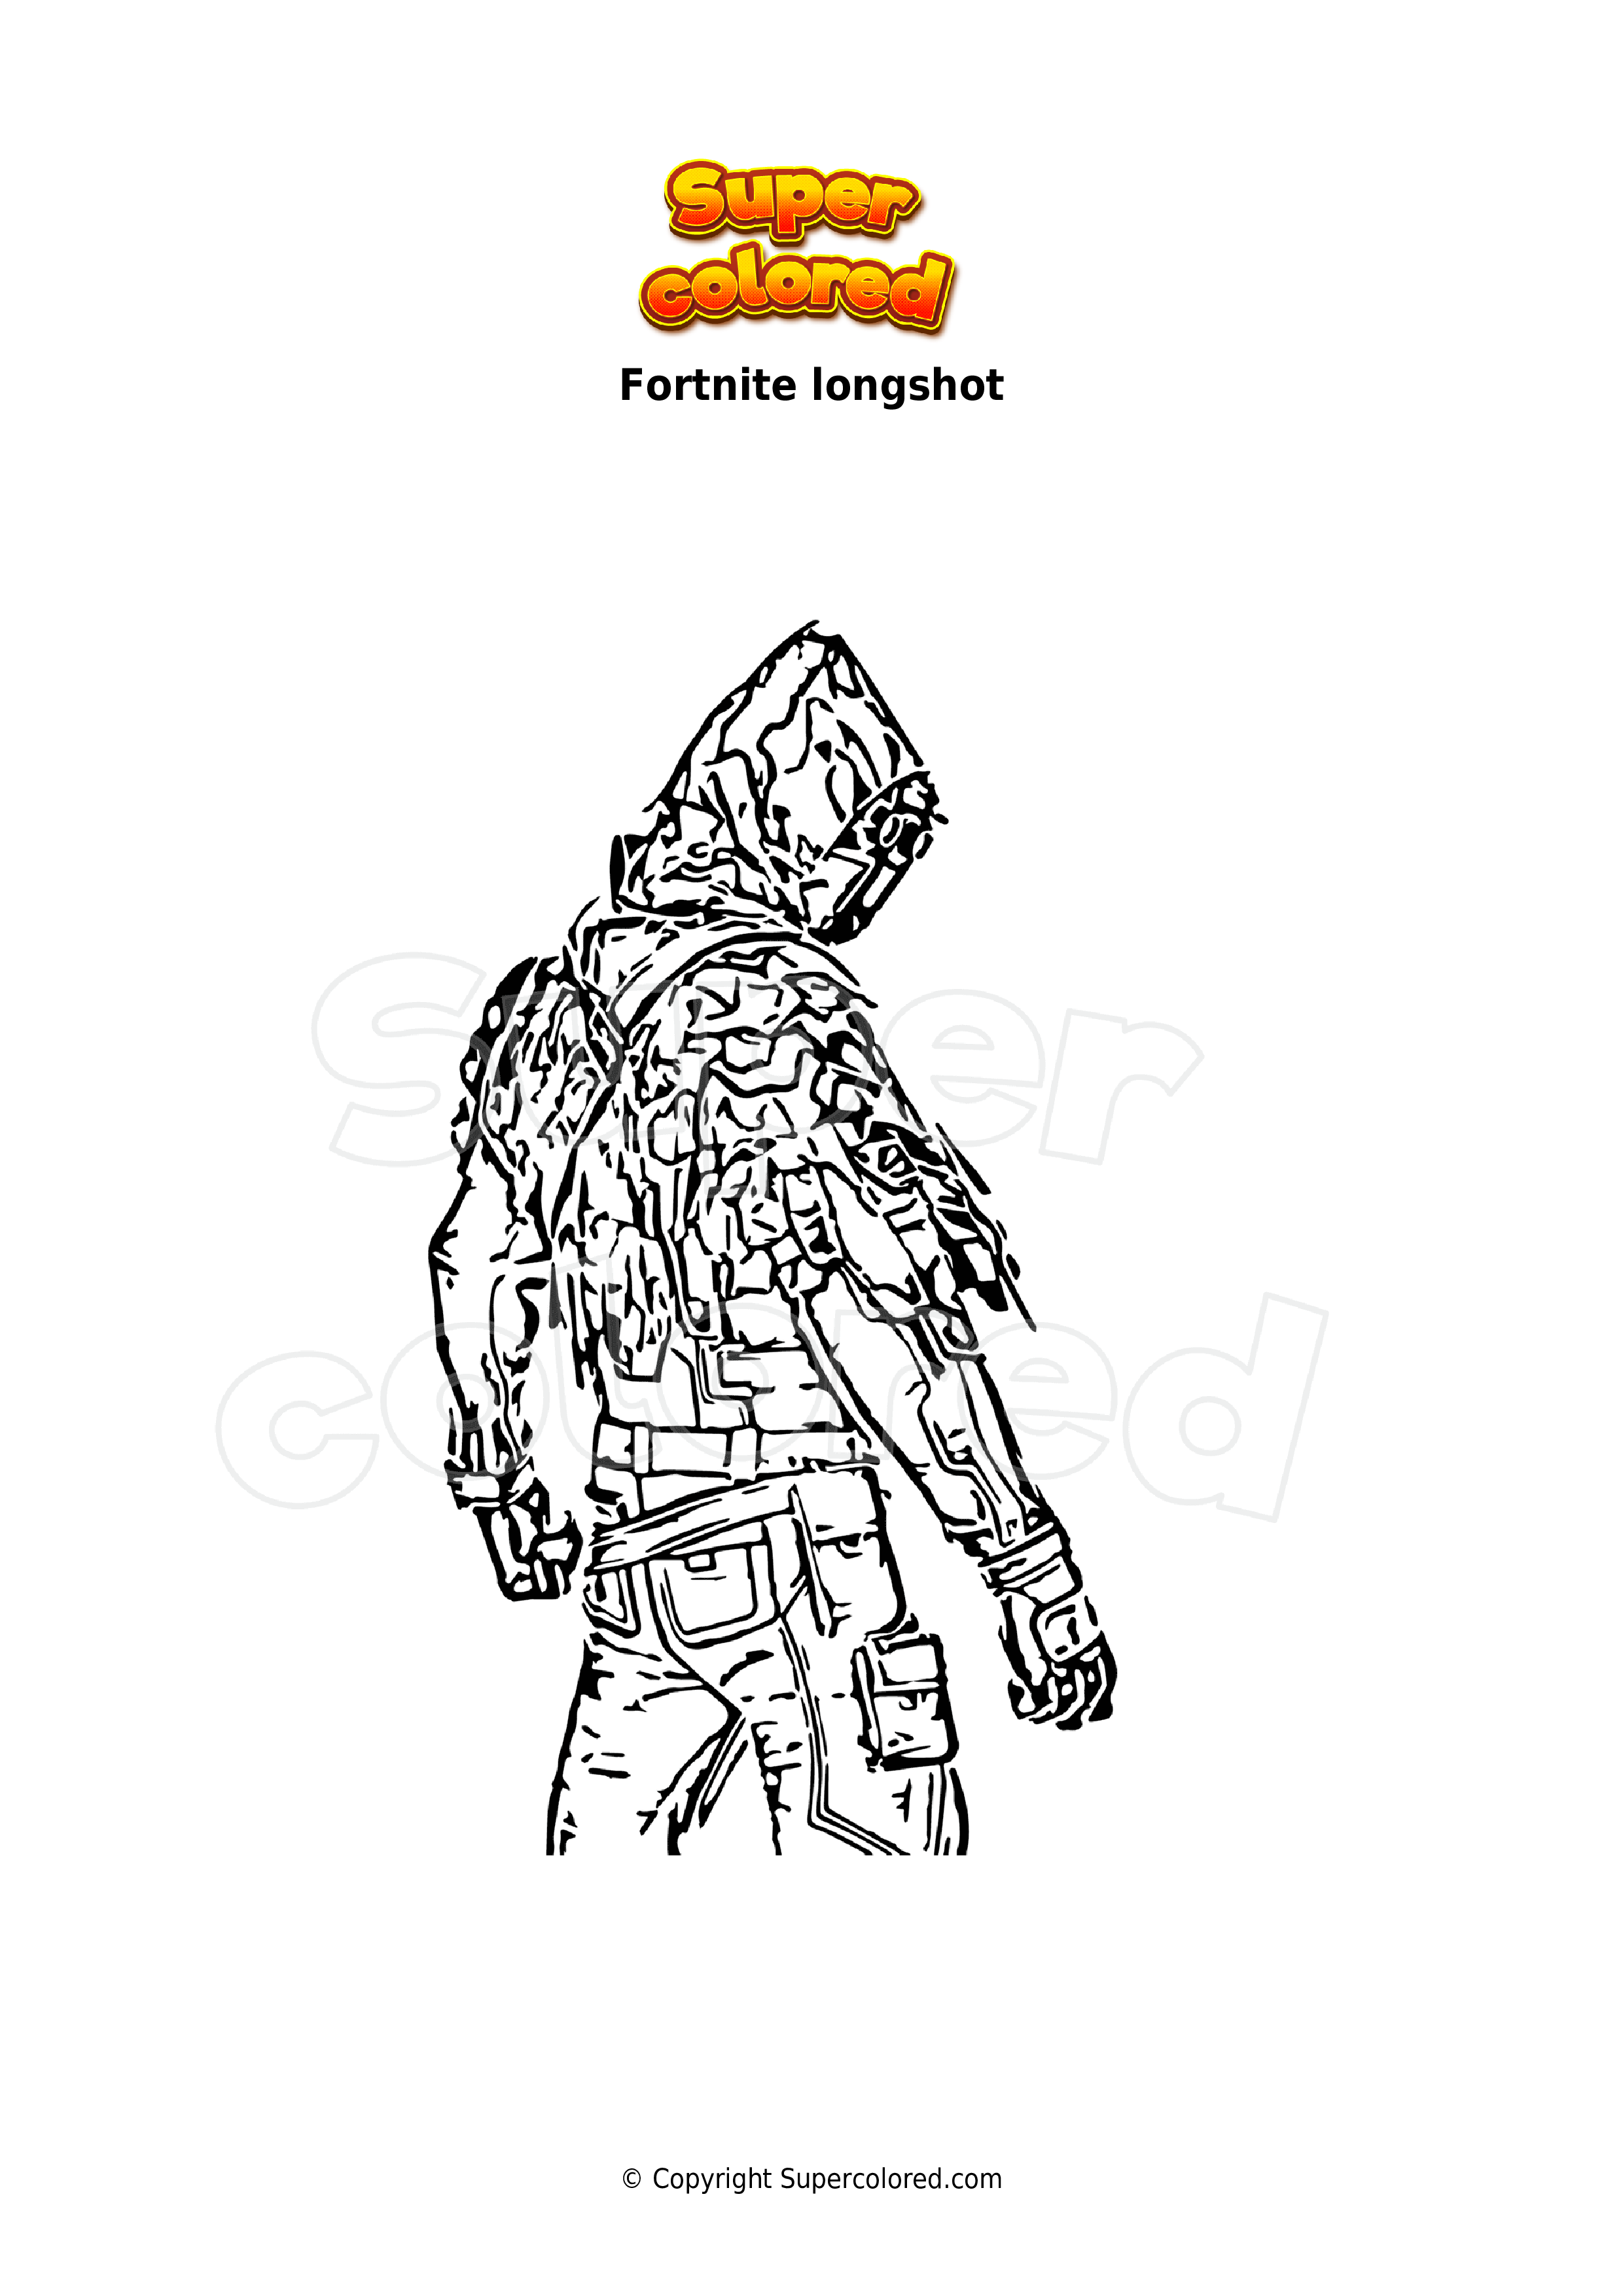 coloring-page-fortnite-longshot-supercolored